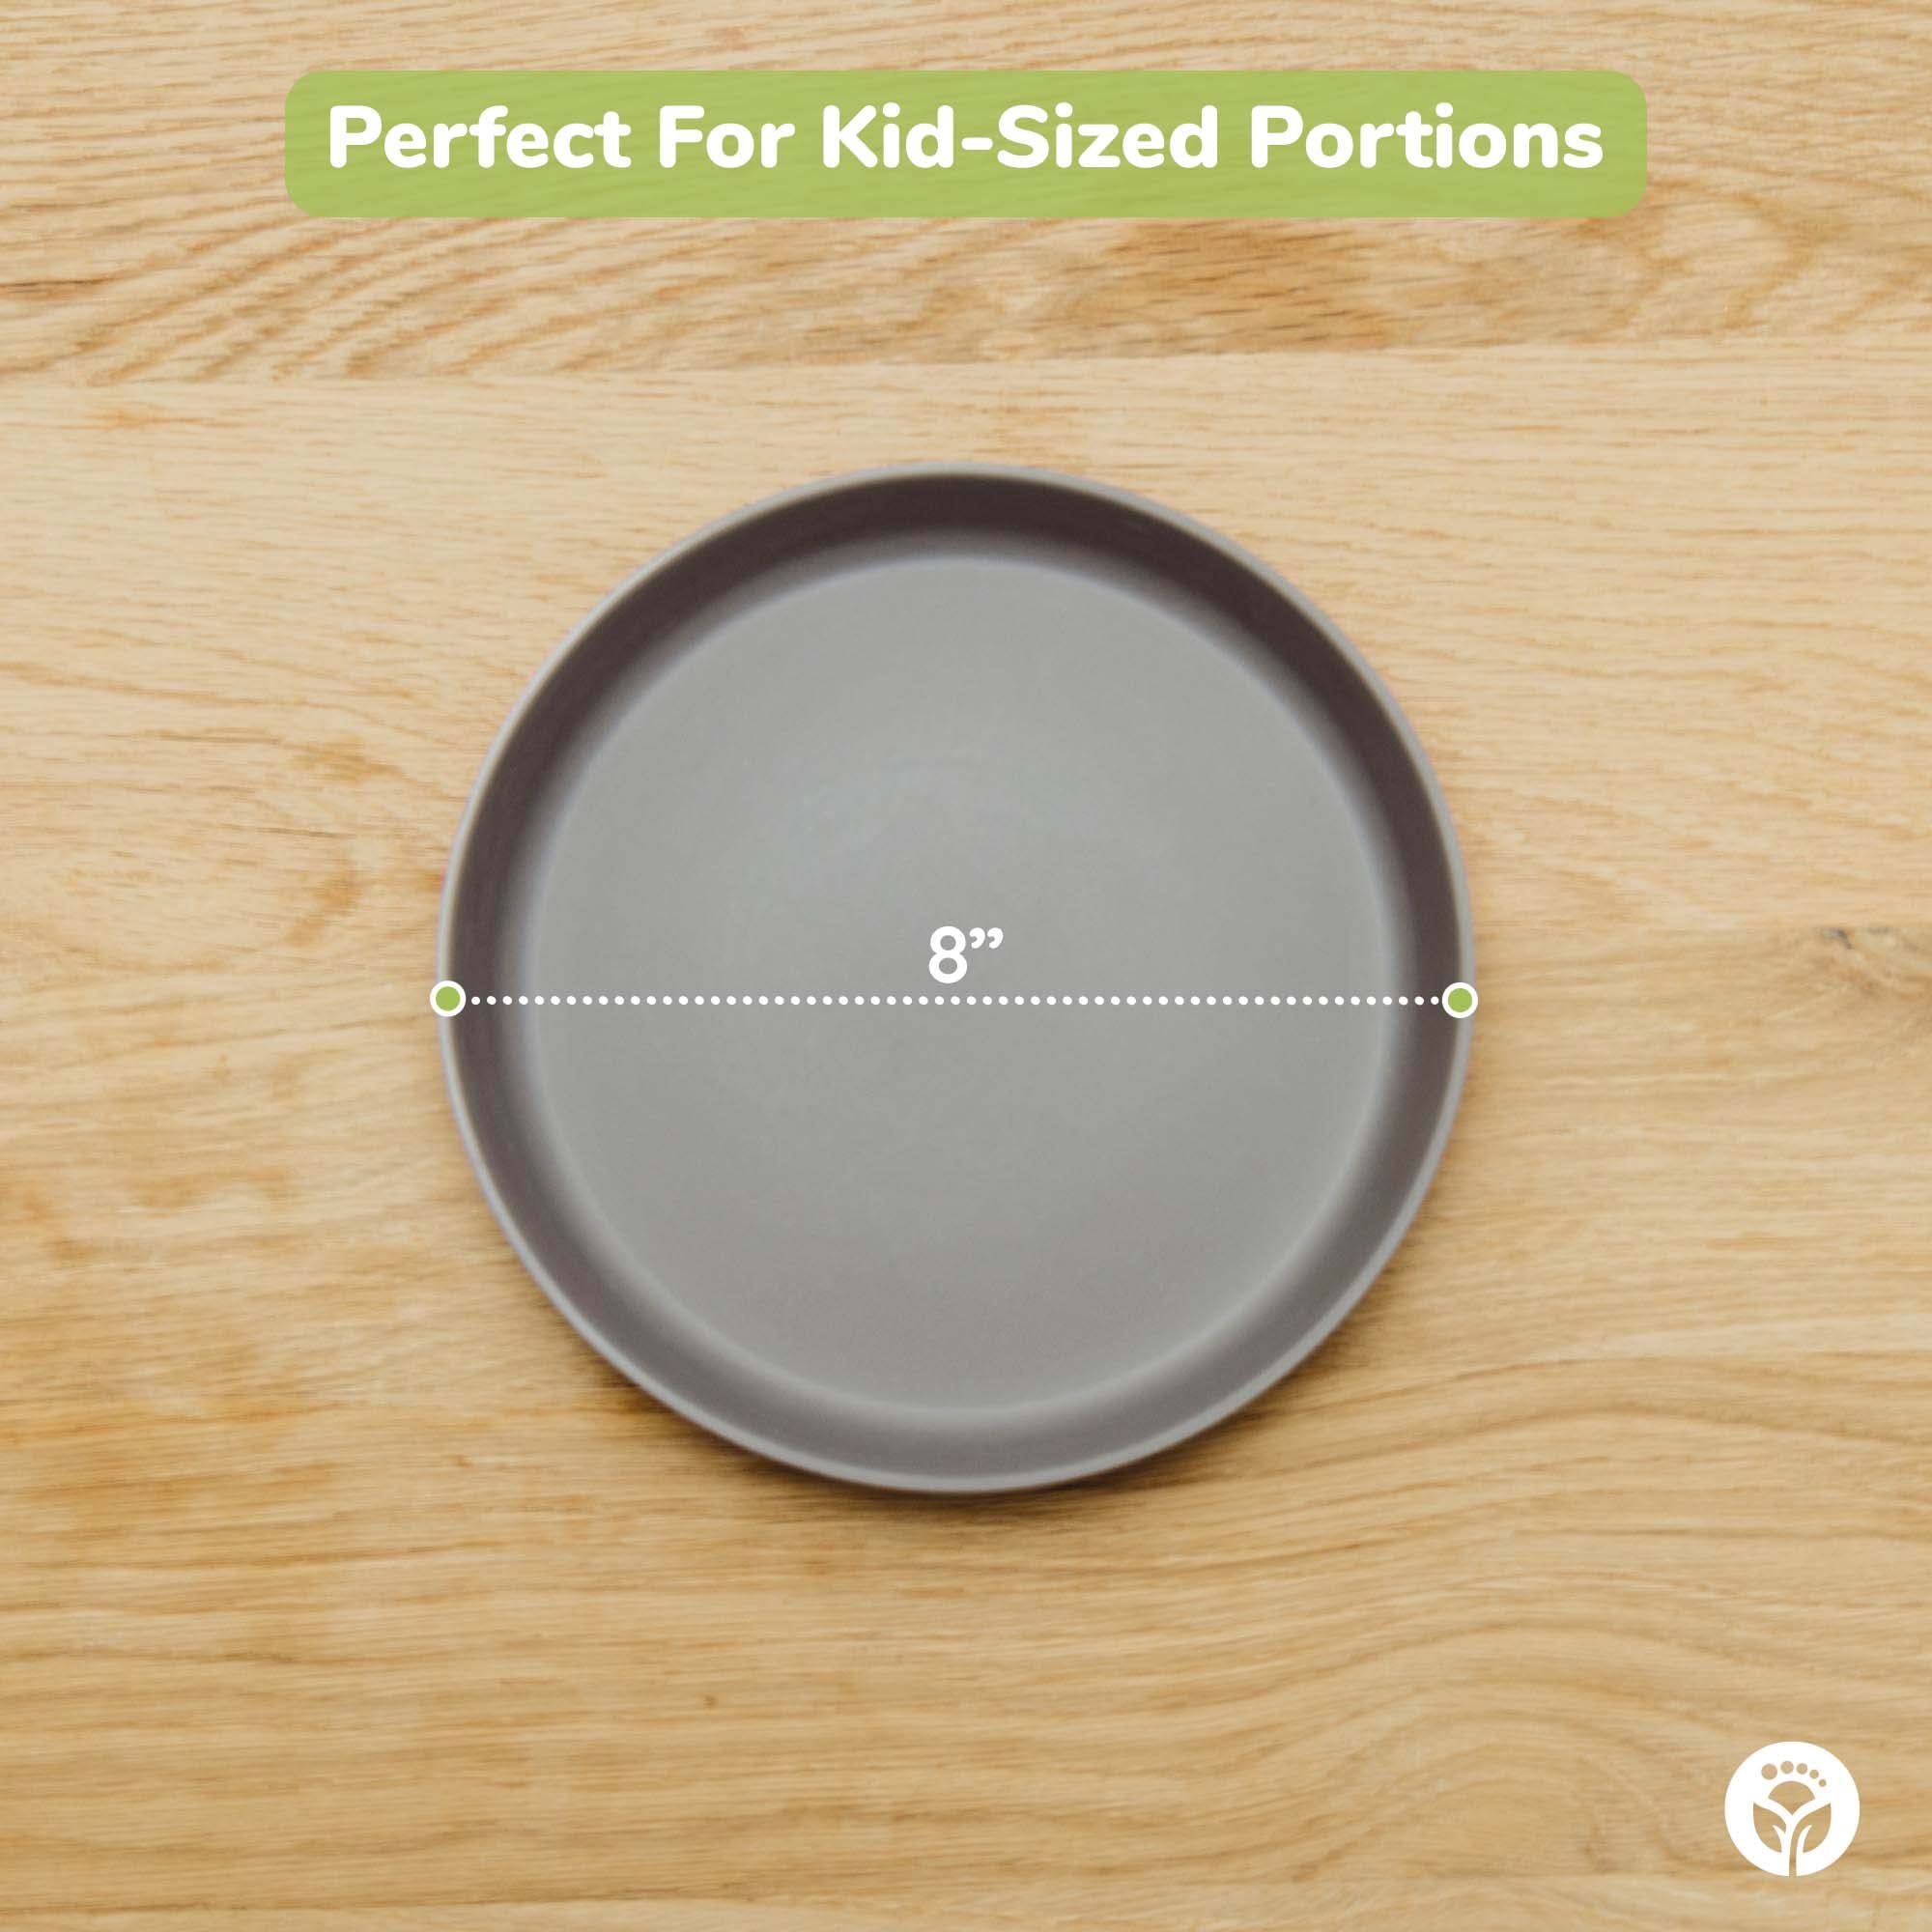 WeeSprout Bamboo Plates with Lids, Set of 4 Bamboo Plates for Kids, Kid-Sized Design, Bamboo Kids Plates with Lids for Leftovers, Dishwasher Safe (Blue, Green, Gray, & Beige)